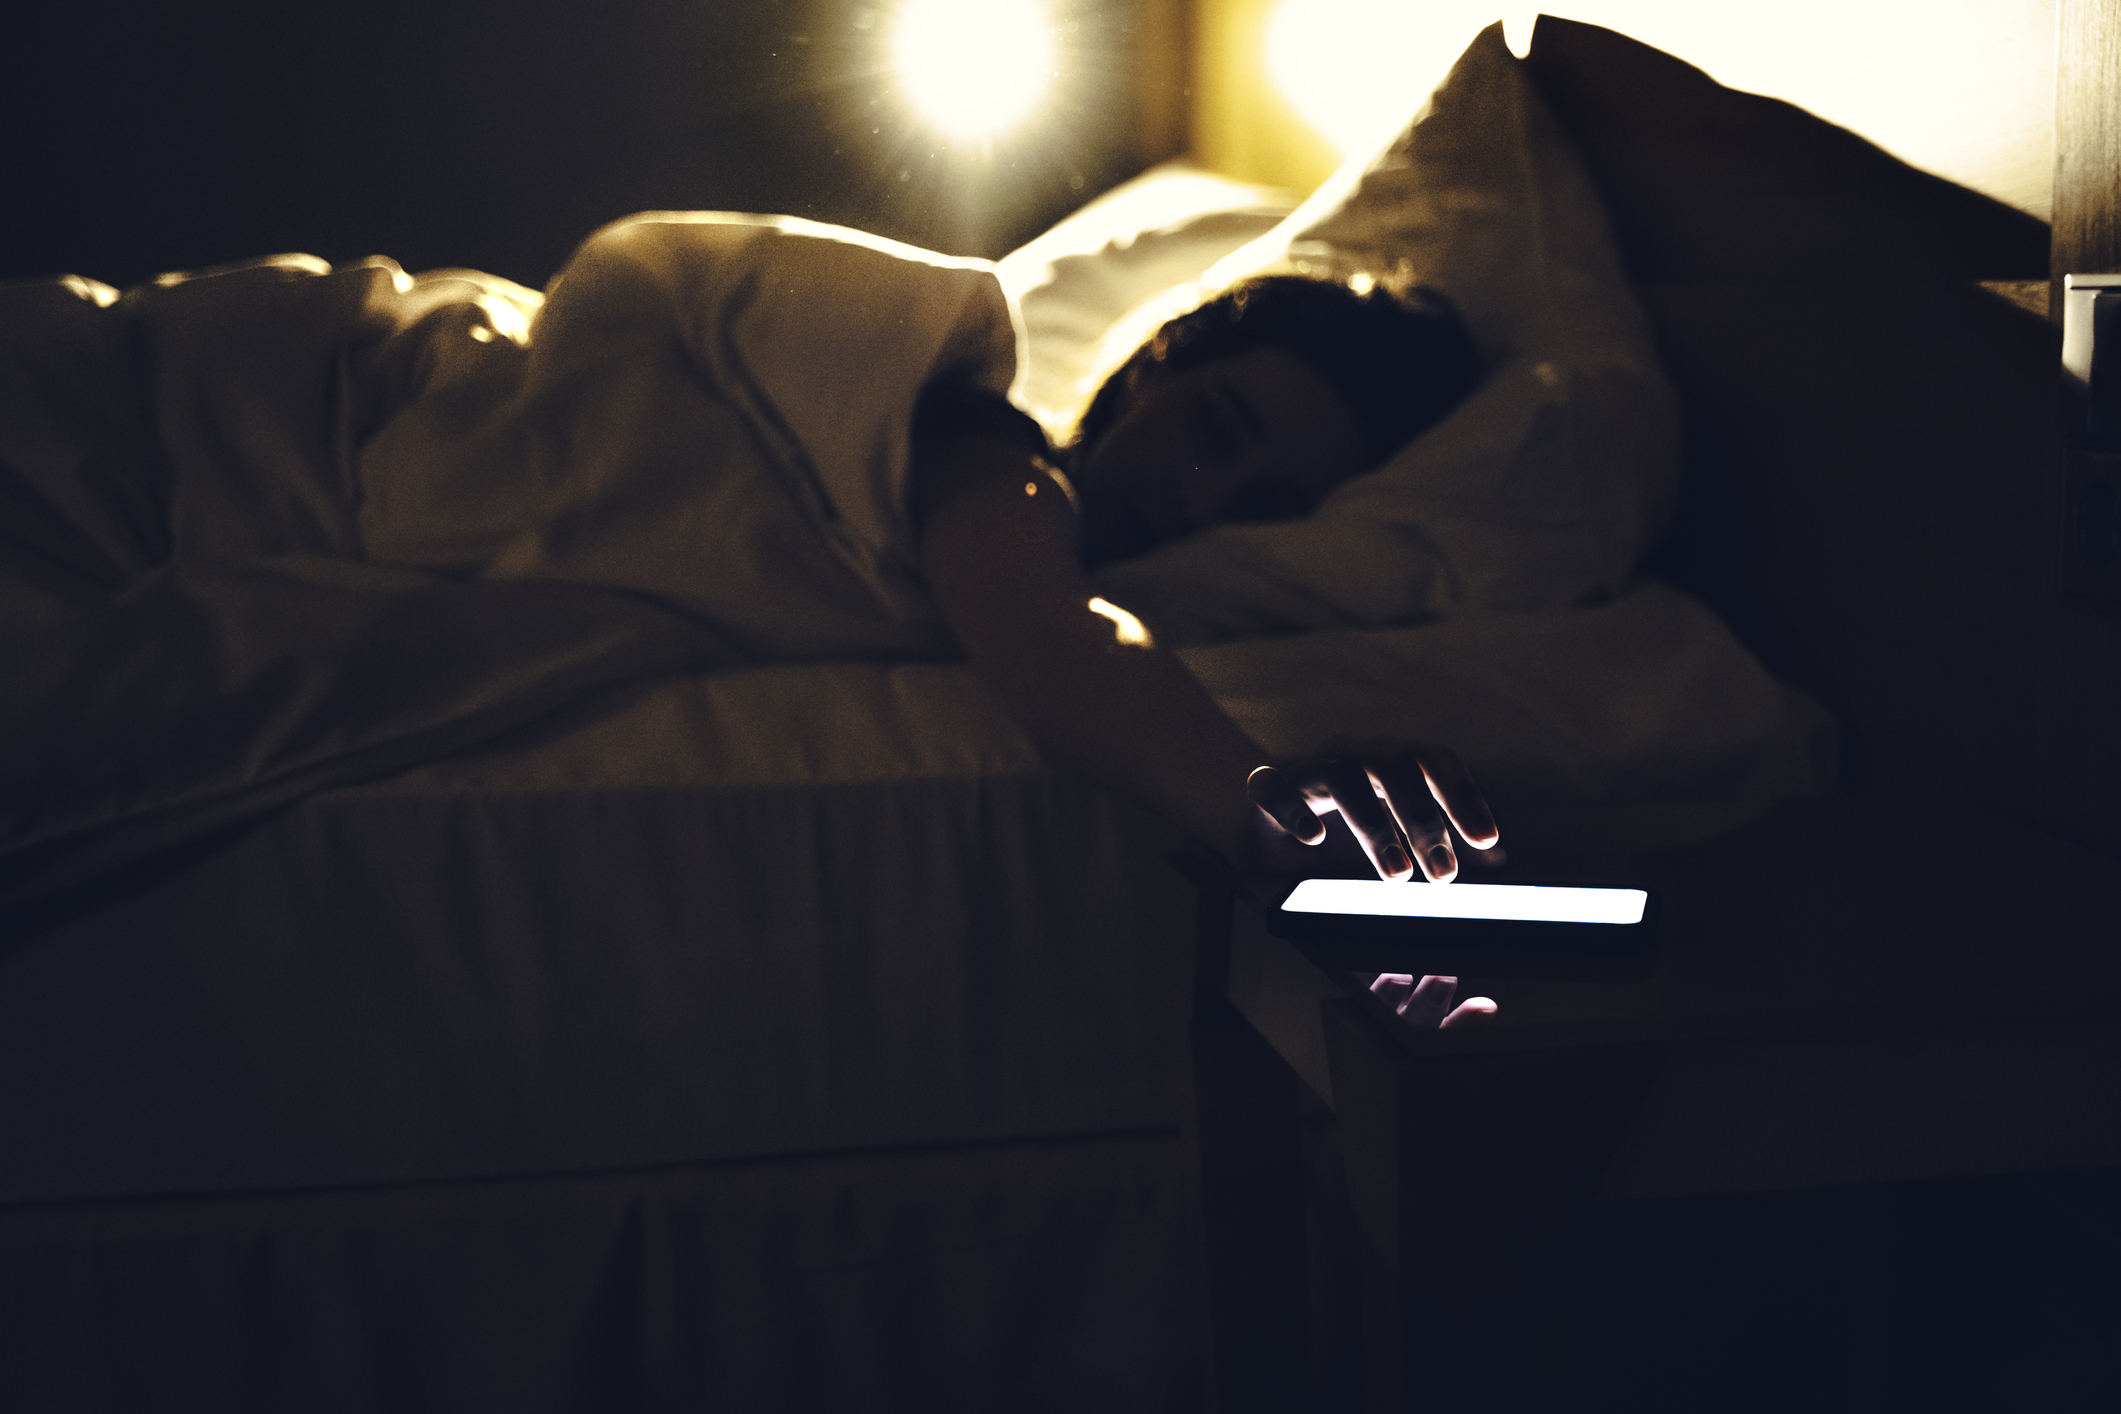 A woman reaching out from under the covers in bed to turn off the phone alarm on the side table next to the bed